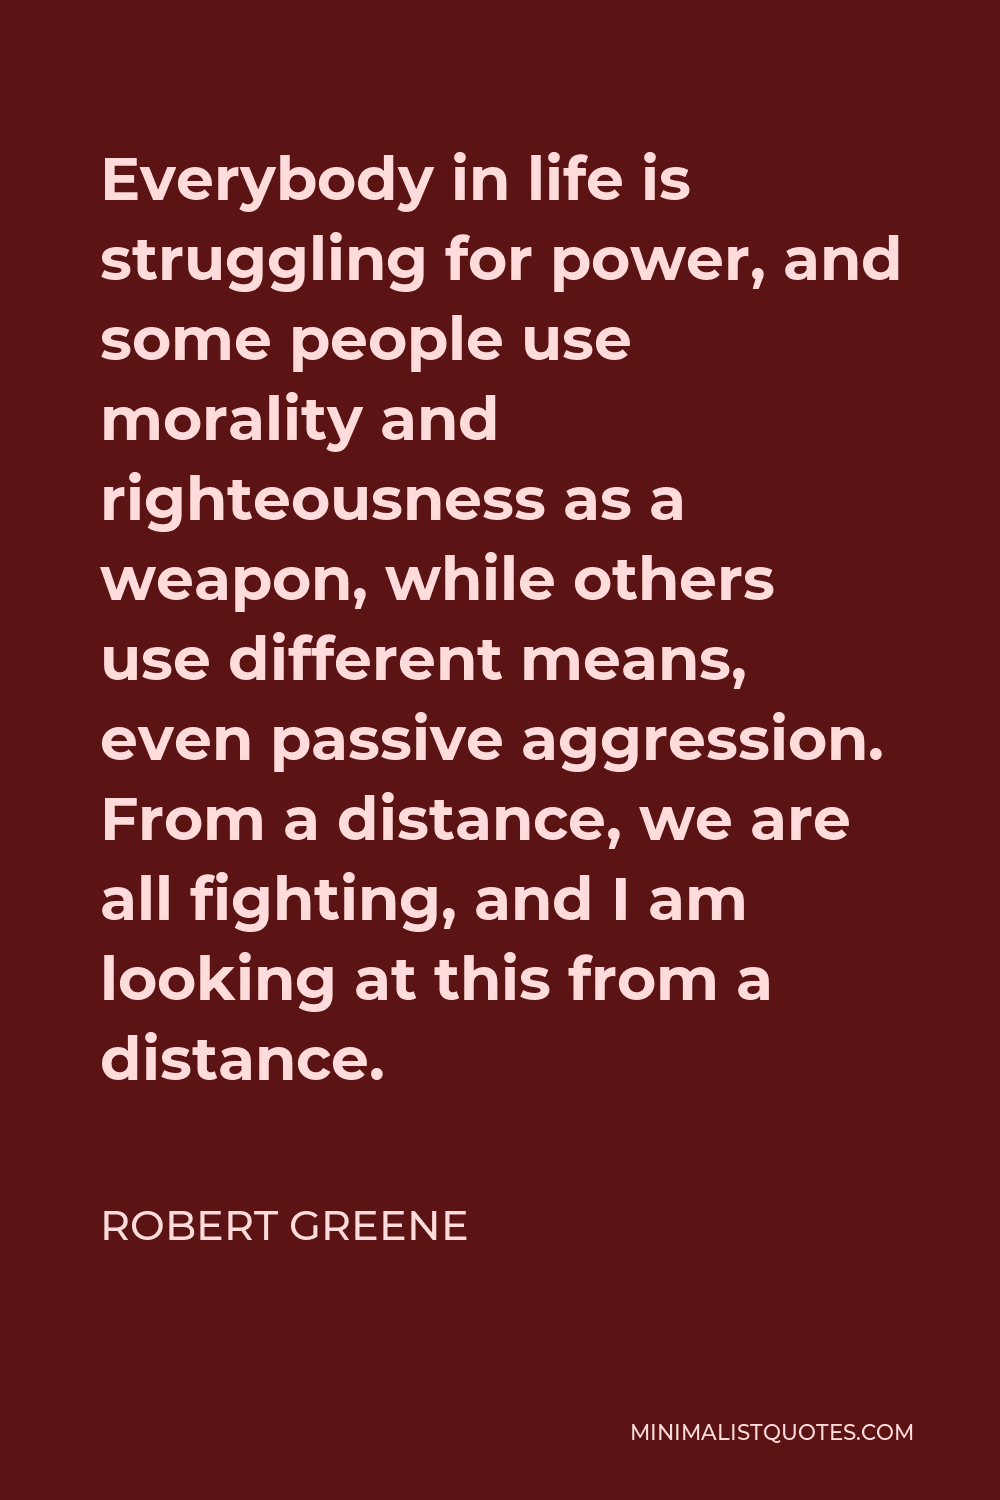 Robert Greene Quote - Everybody in life is struggling for power, and some people use morality and righteousness as a weapon, while others use different means, even passive aggression. From a distance, we are all fighting, and I am looking at this from a distance.